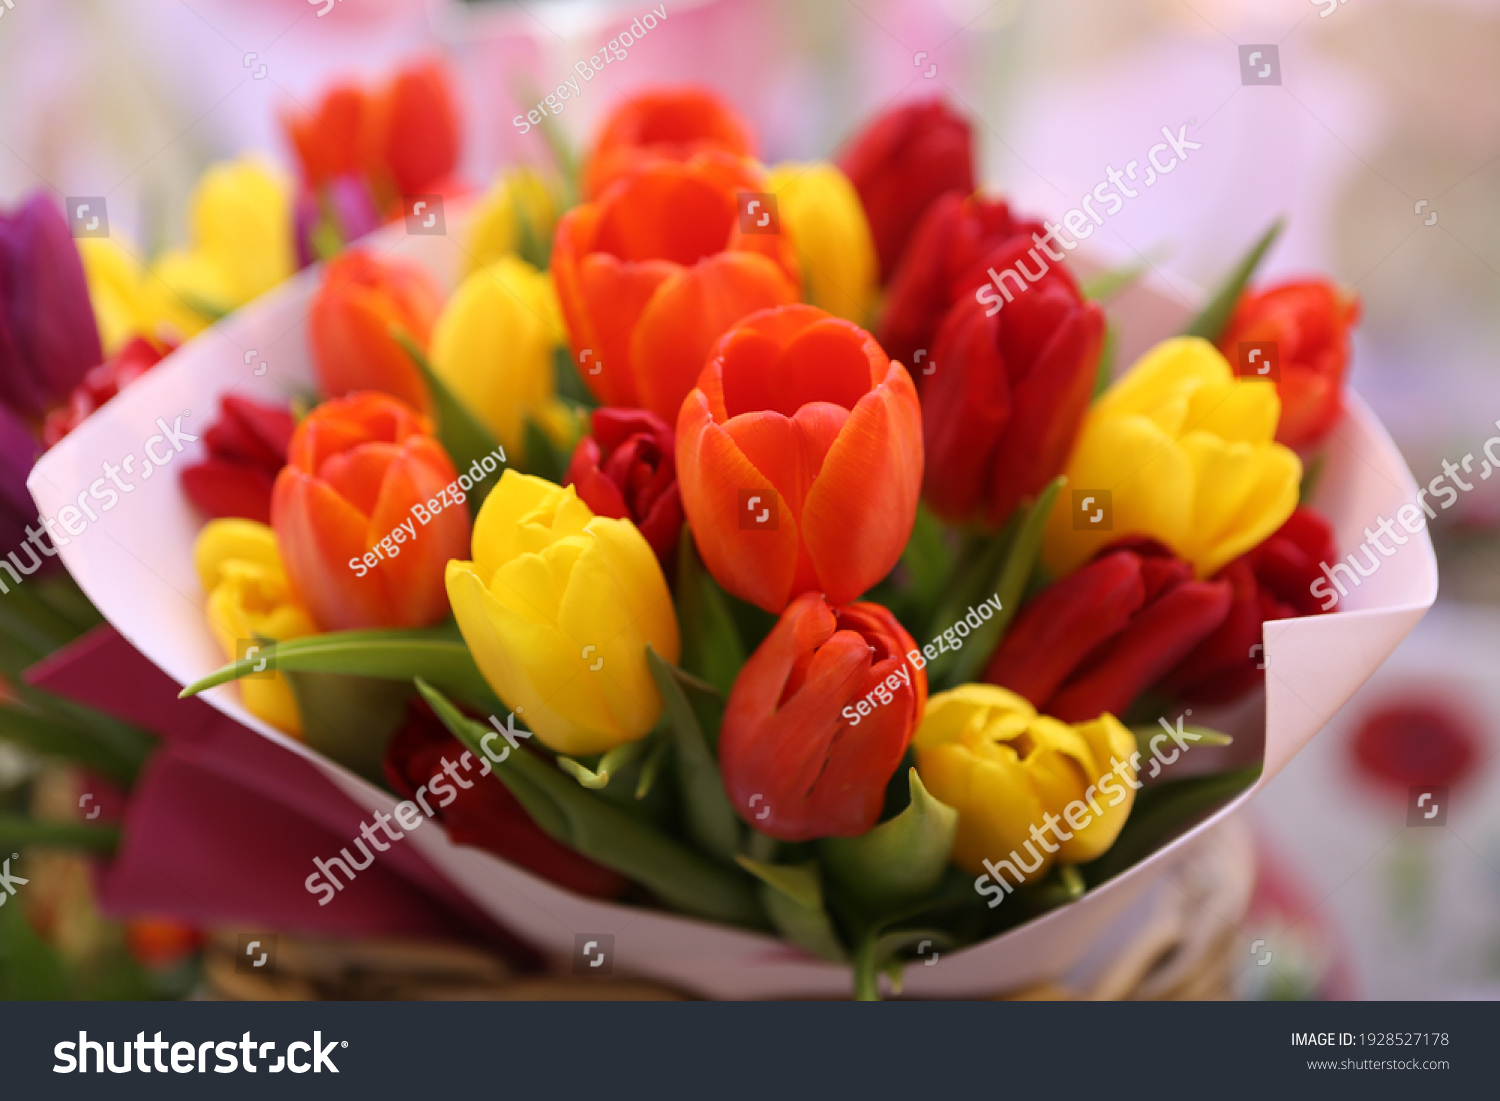 Tulip, tulips bouquet. Present for March 8, International Women's Day. Holiday decor with flowers. Bouquet with colorful tulips. Red tulip, yellow tulip. Holiday floral decor. Spring tulips, bouquet #1928527178